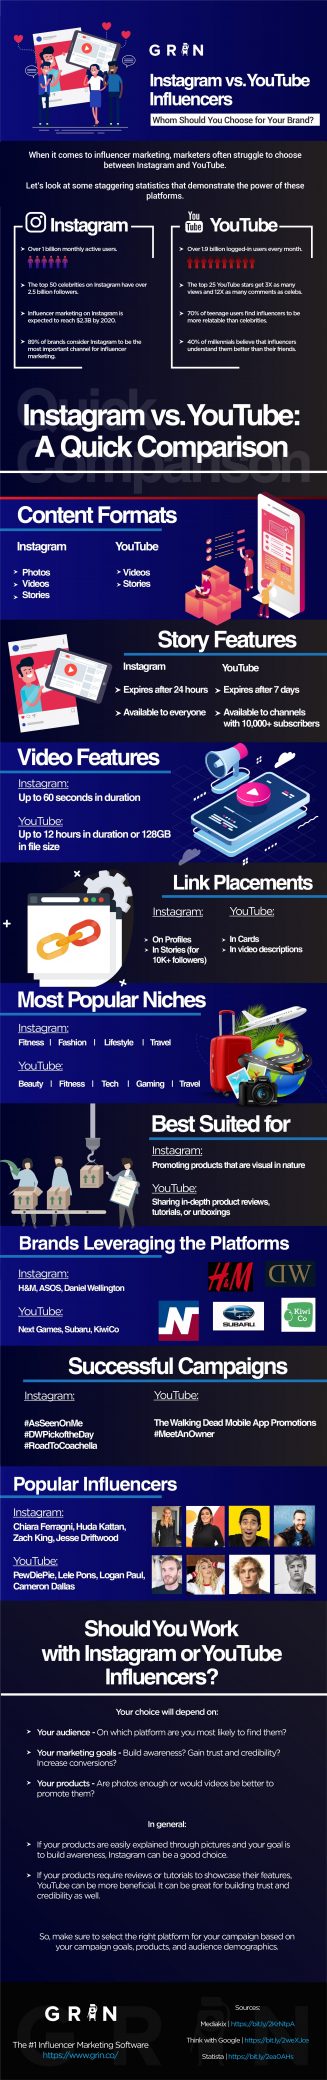 The Benefits of Instagram vs the Benefits of YouTube [Infographic]